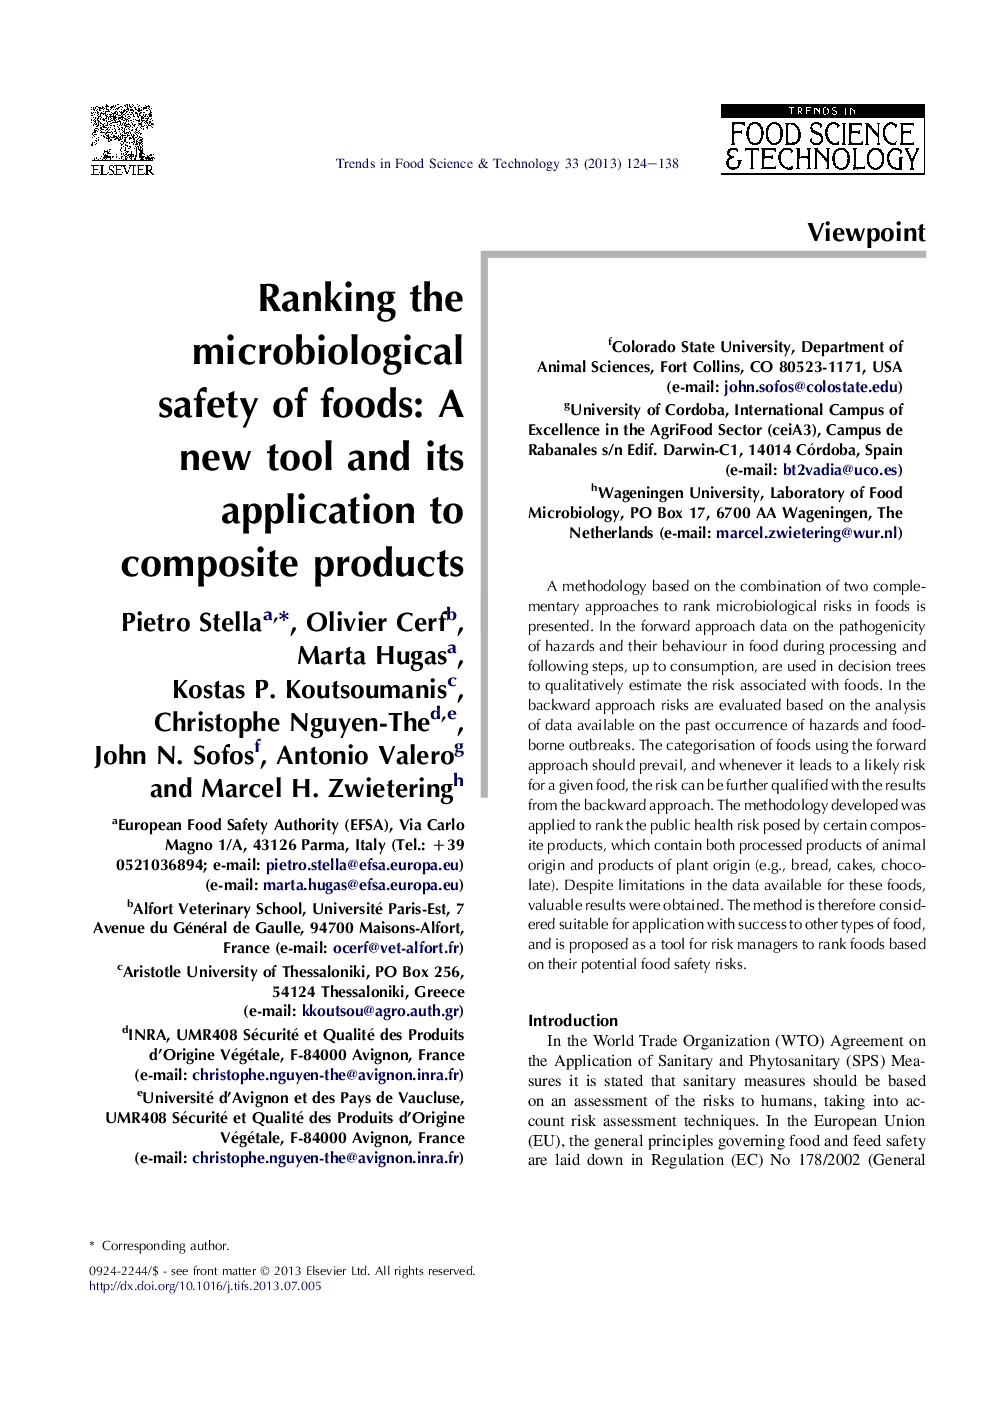 Ranking the microbiological safety of foods: A new tool and its application to composite products